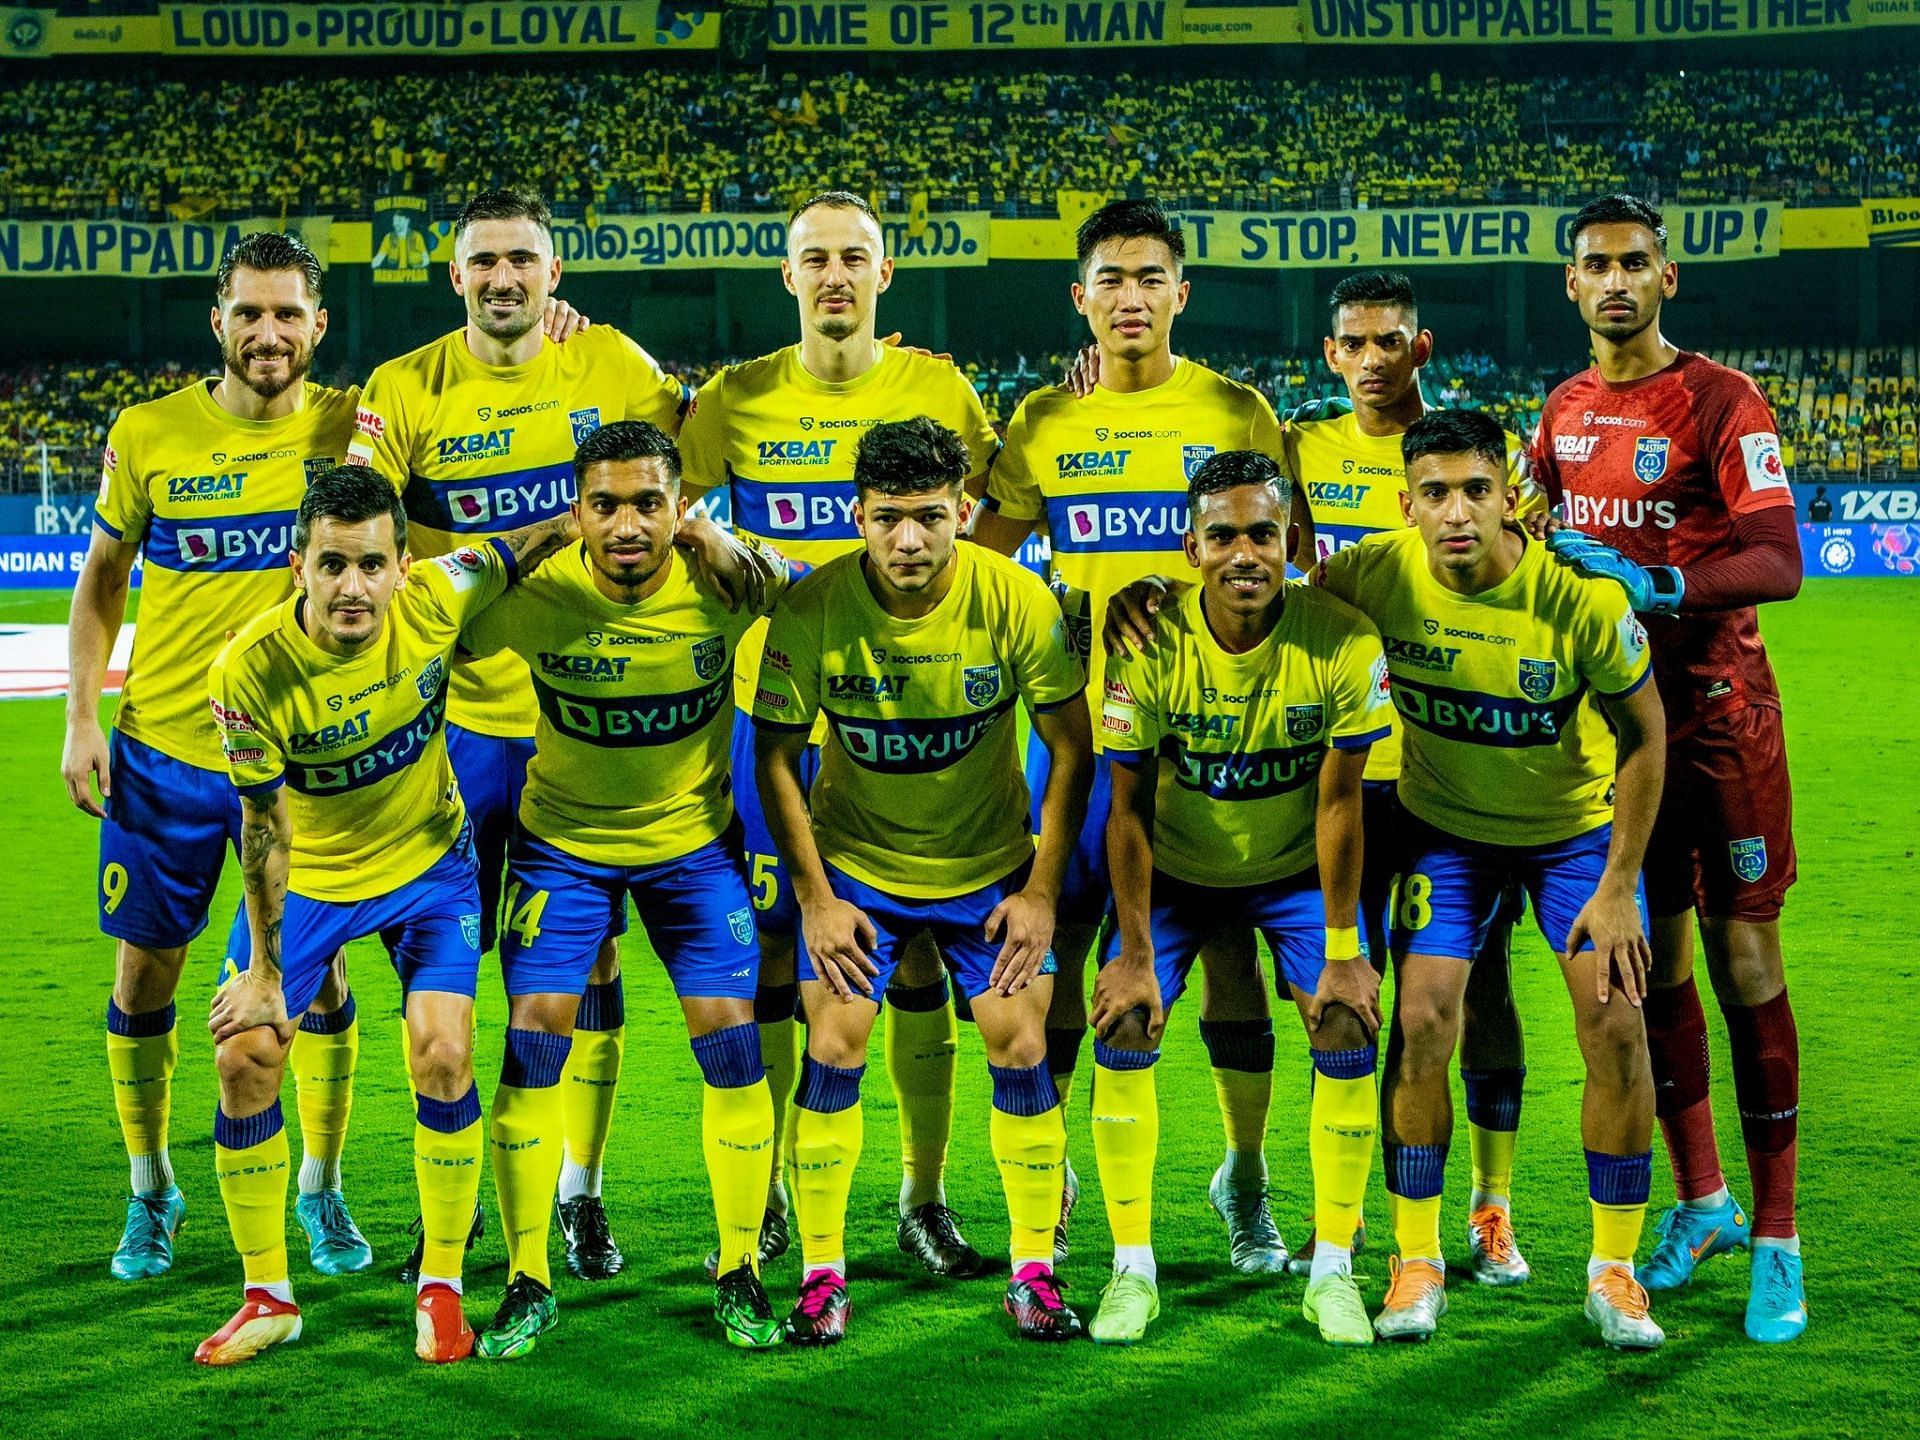 Kerala Blasters FC have been struggling away from home all season.